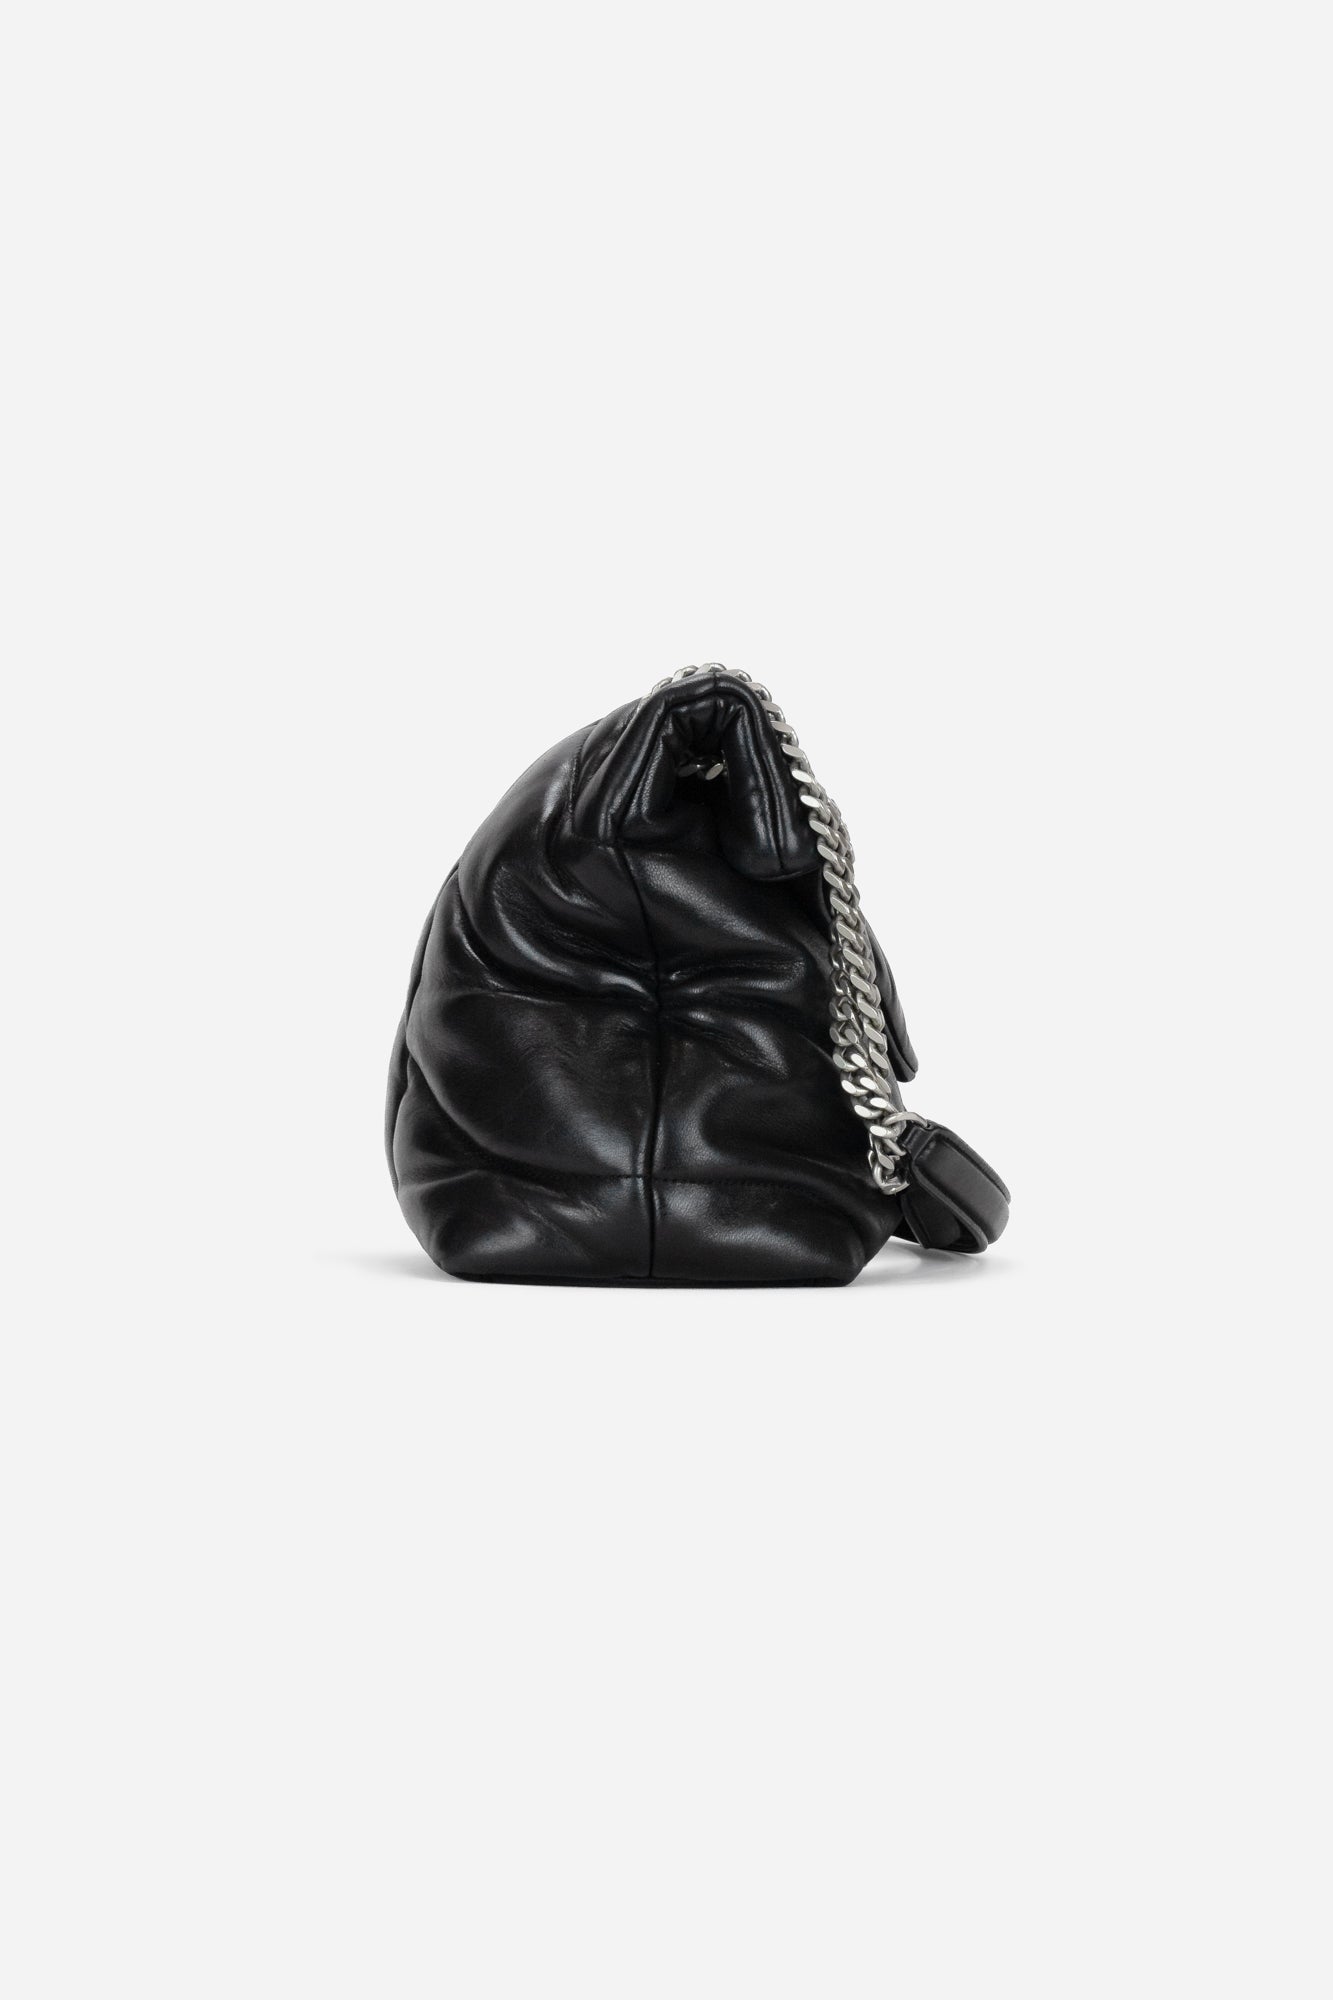 Puffer Medium Chain Bag in Quilted Lambskin